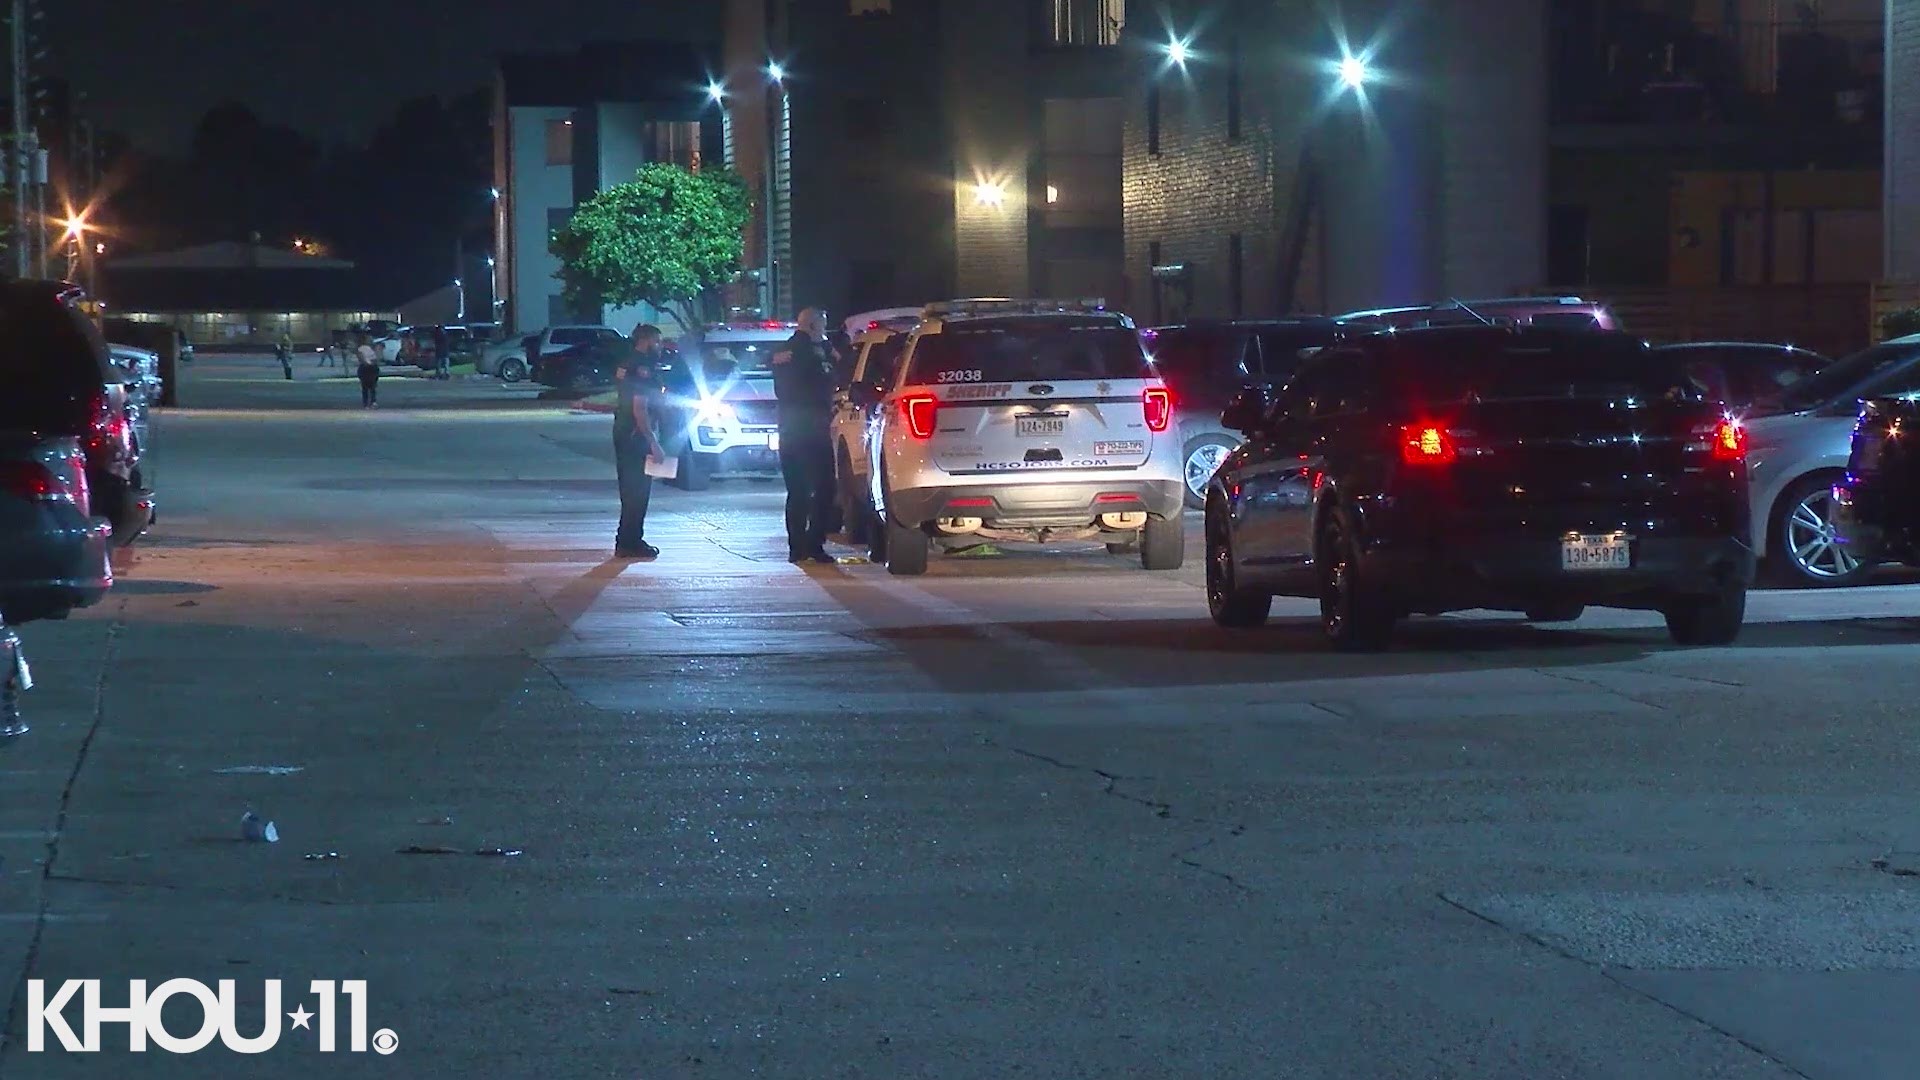 Deputies are looking for the suspect who shot his own family member at an apartment complex in north Harris County.